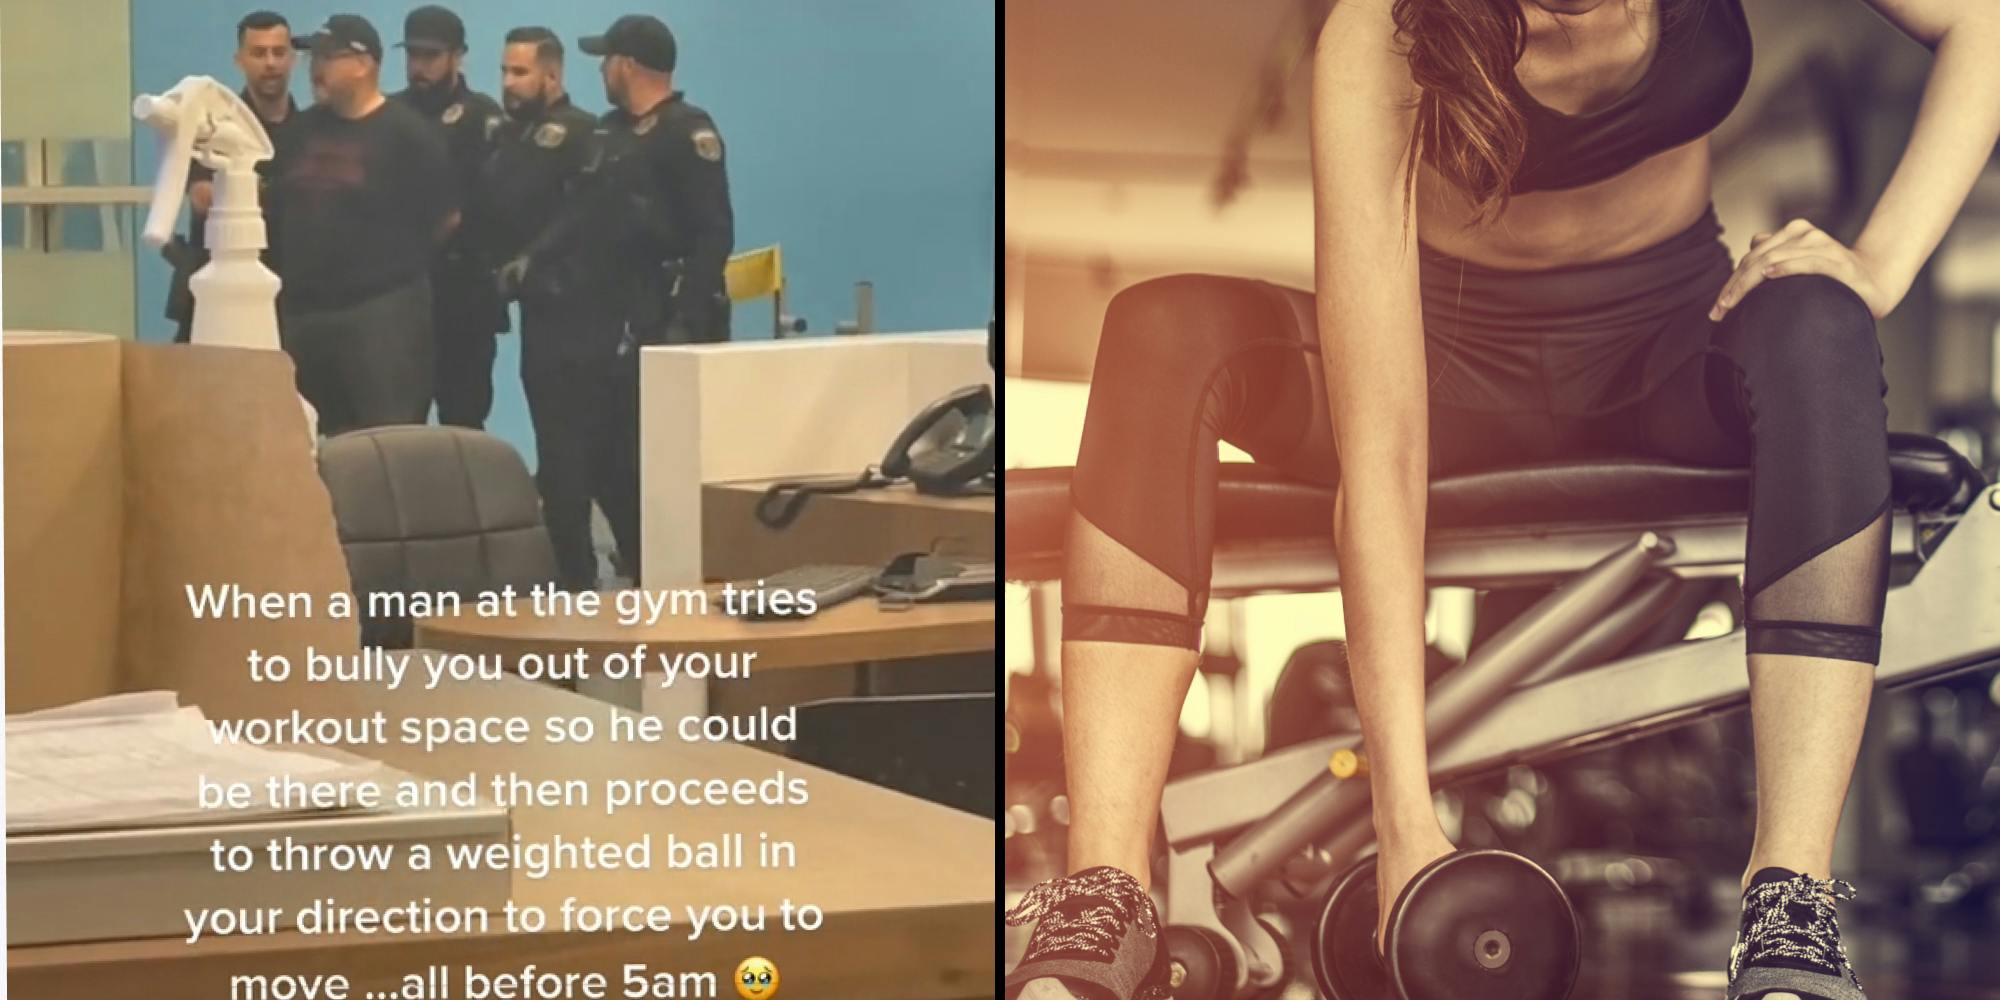 Man at gym being arrested by 4 police officers with caption "When a man at the gym tries to bully you out of your work space so he could be there then proceeds to throw a weighted ball in your direction to force you to move... all before 5 am" (l) Woman using dumbbell at gym (r)